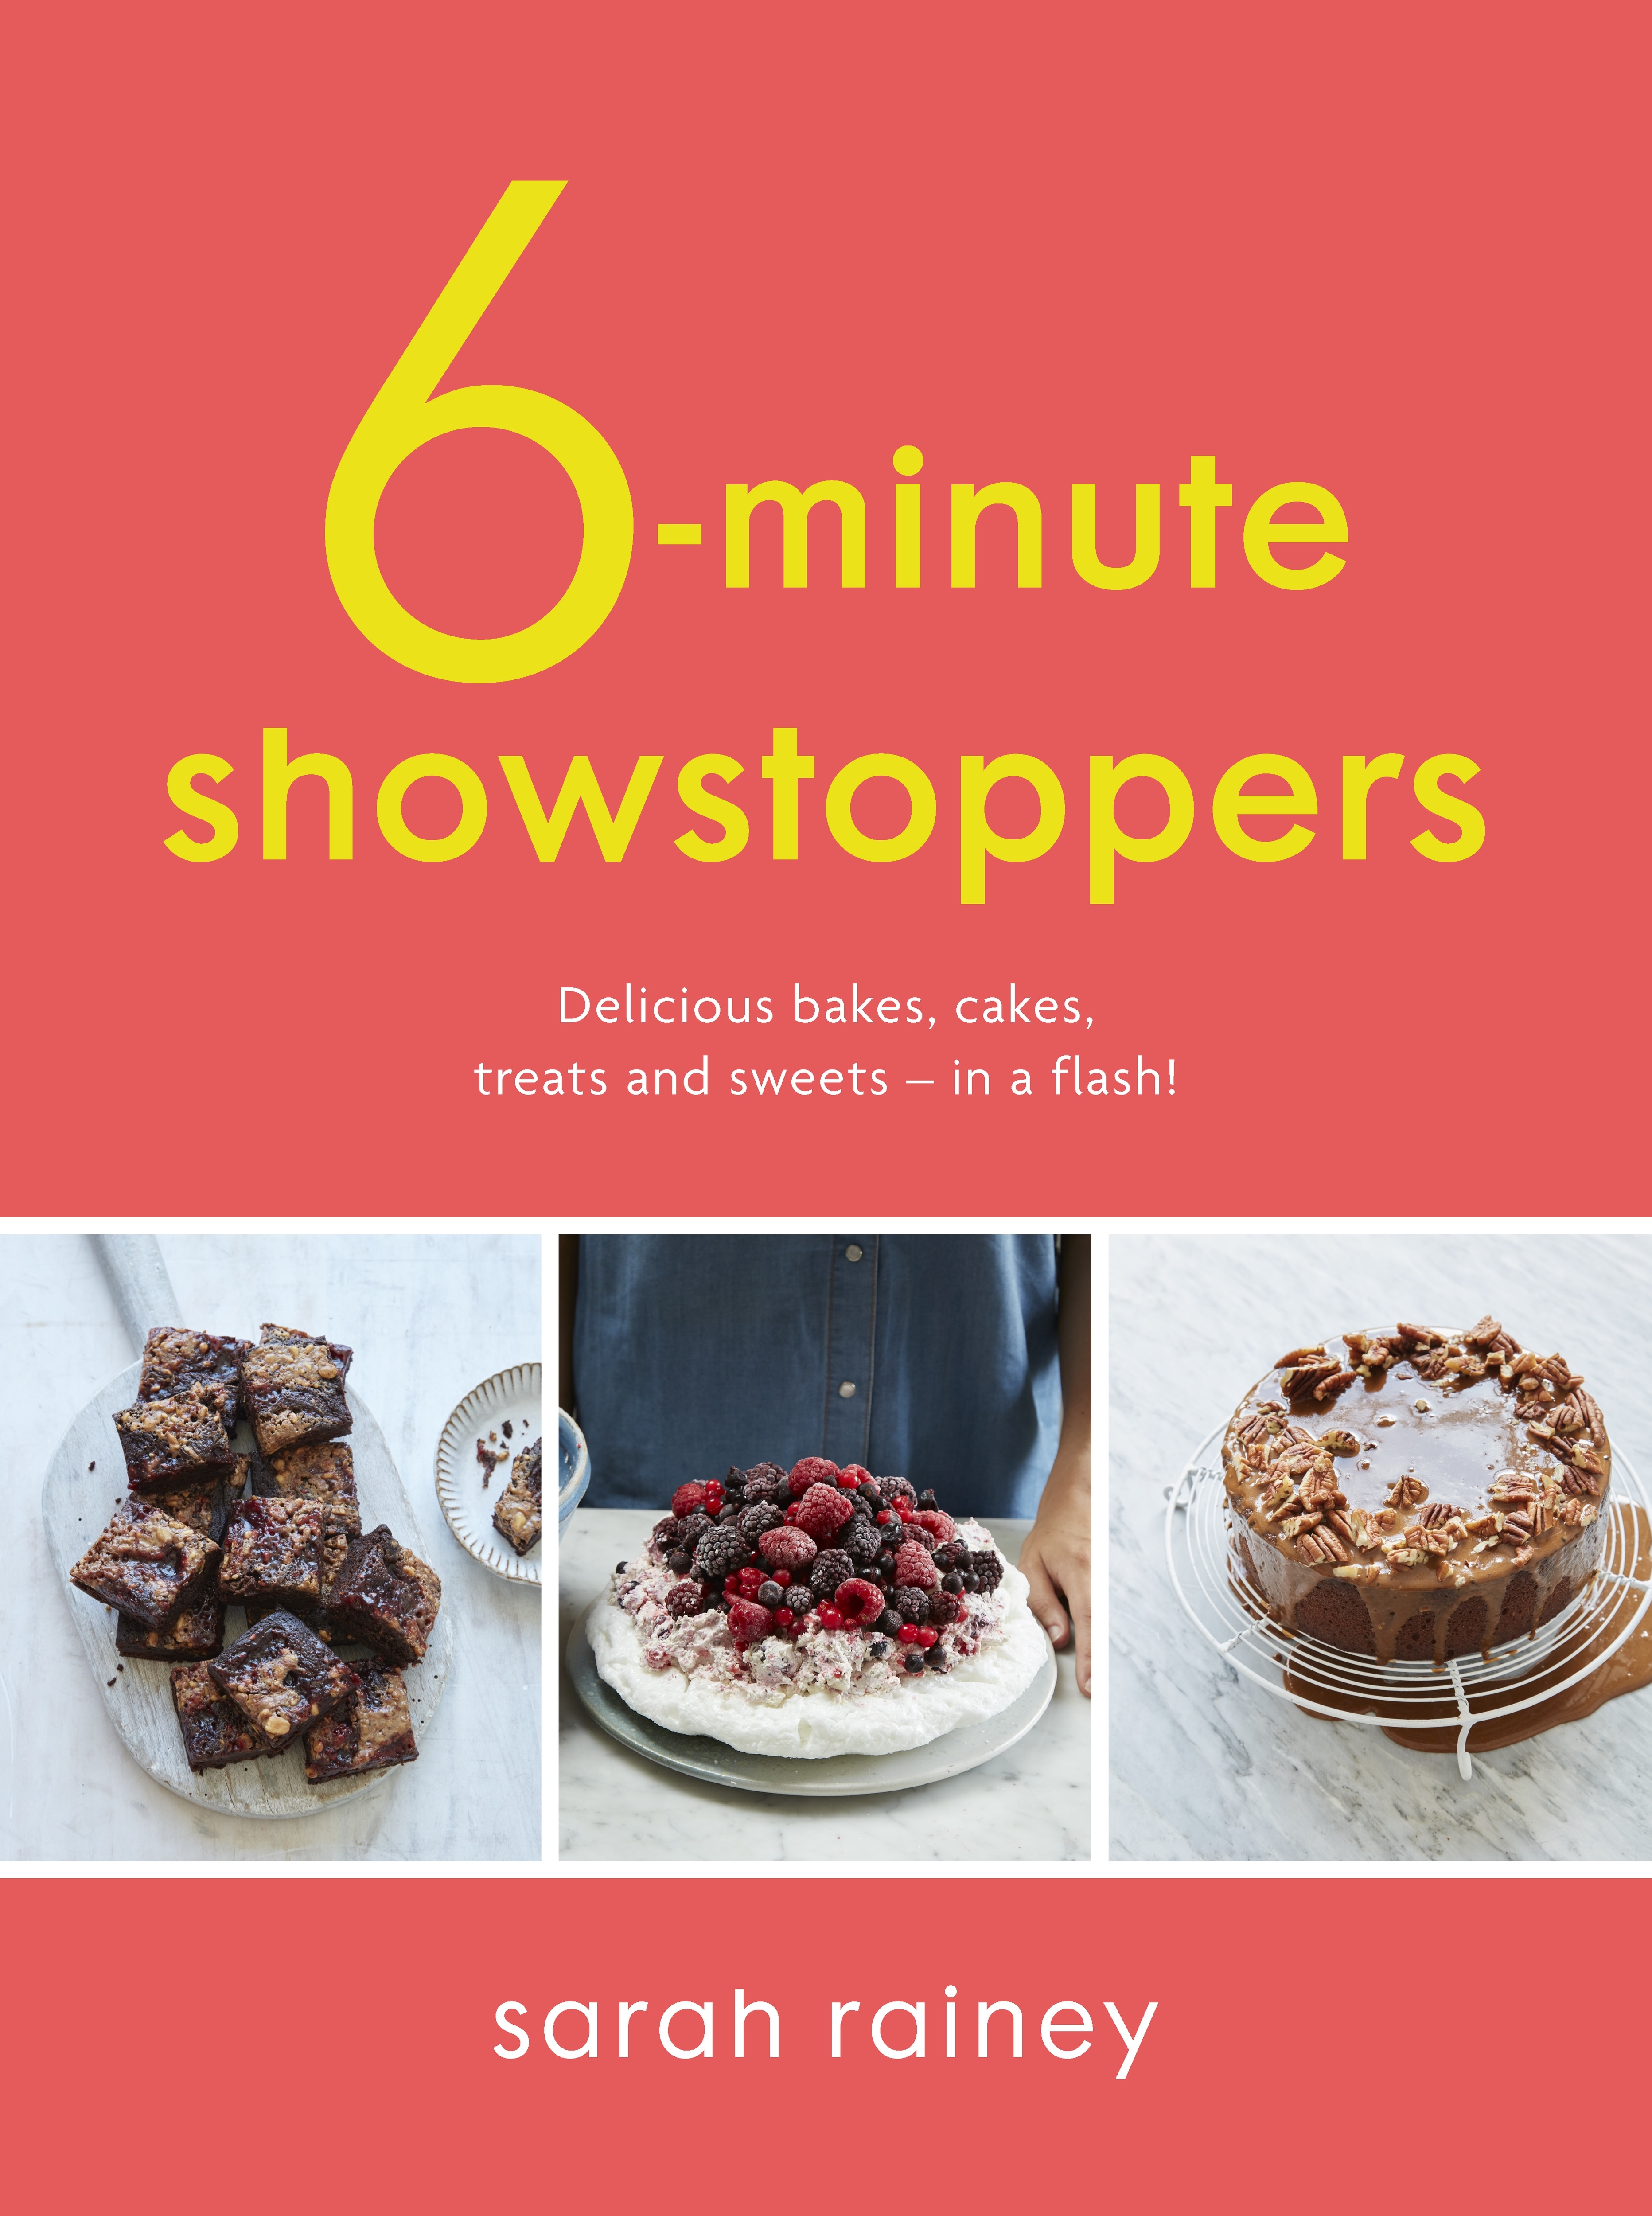 Book “Six-Minute Showstoppers” by Sarah Rainey — May 14, 2020